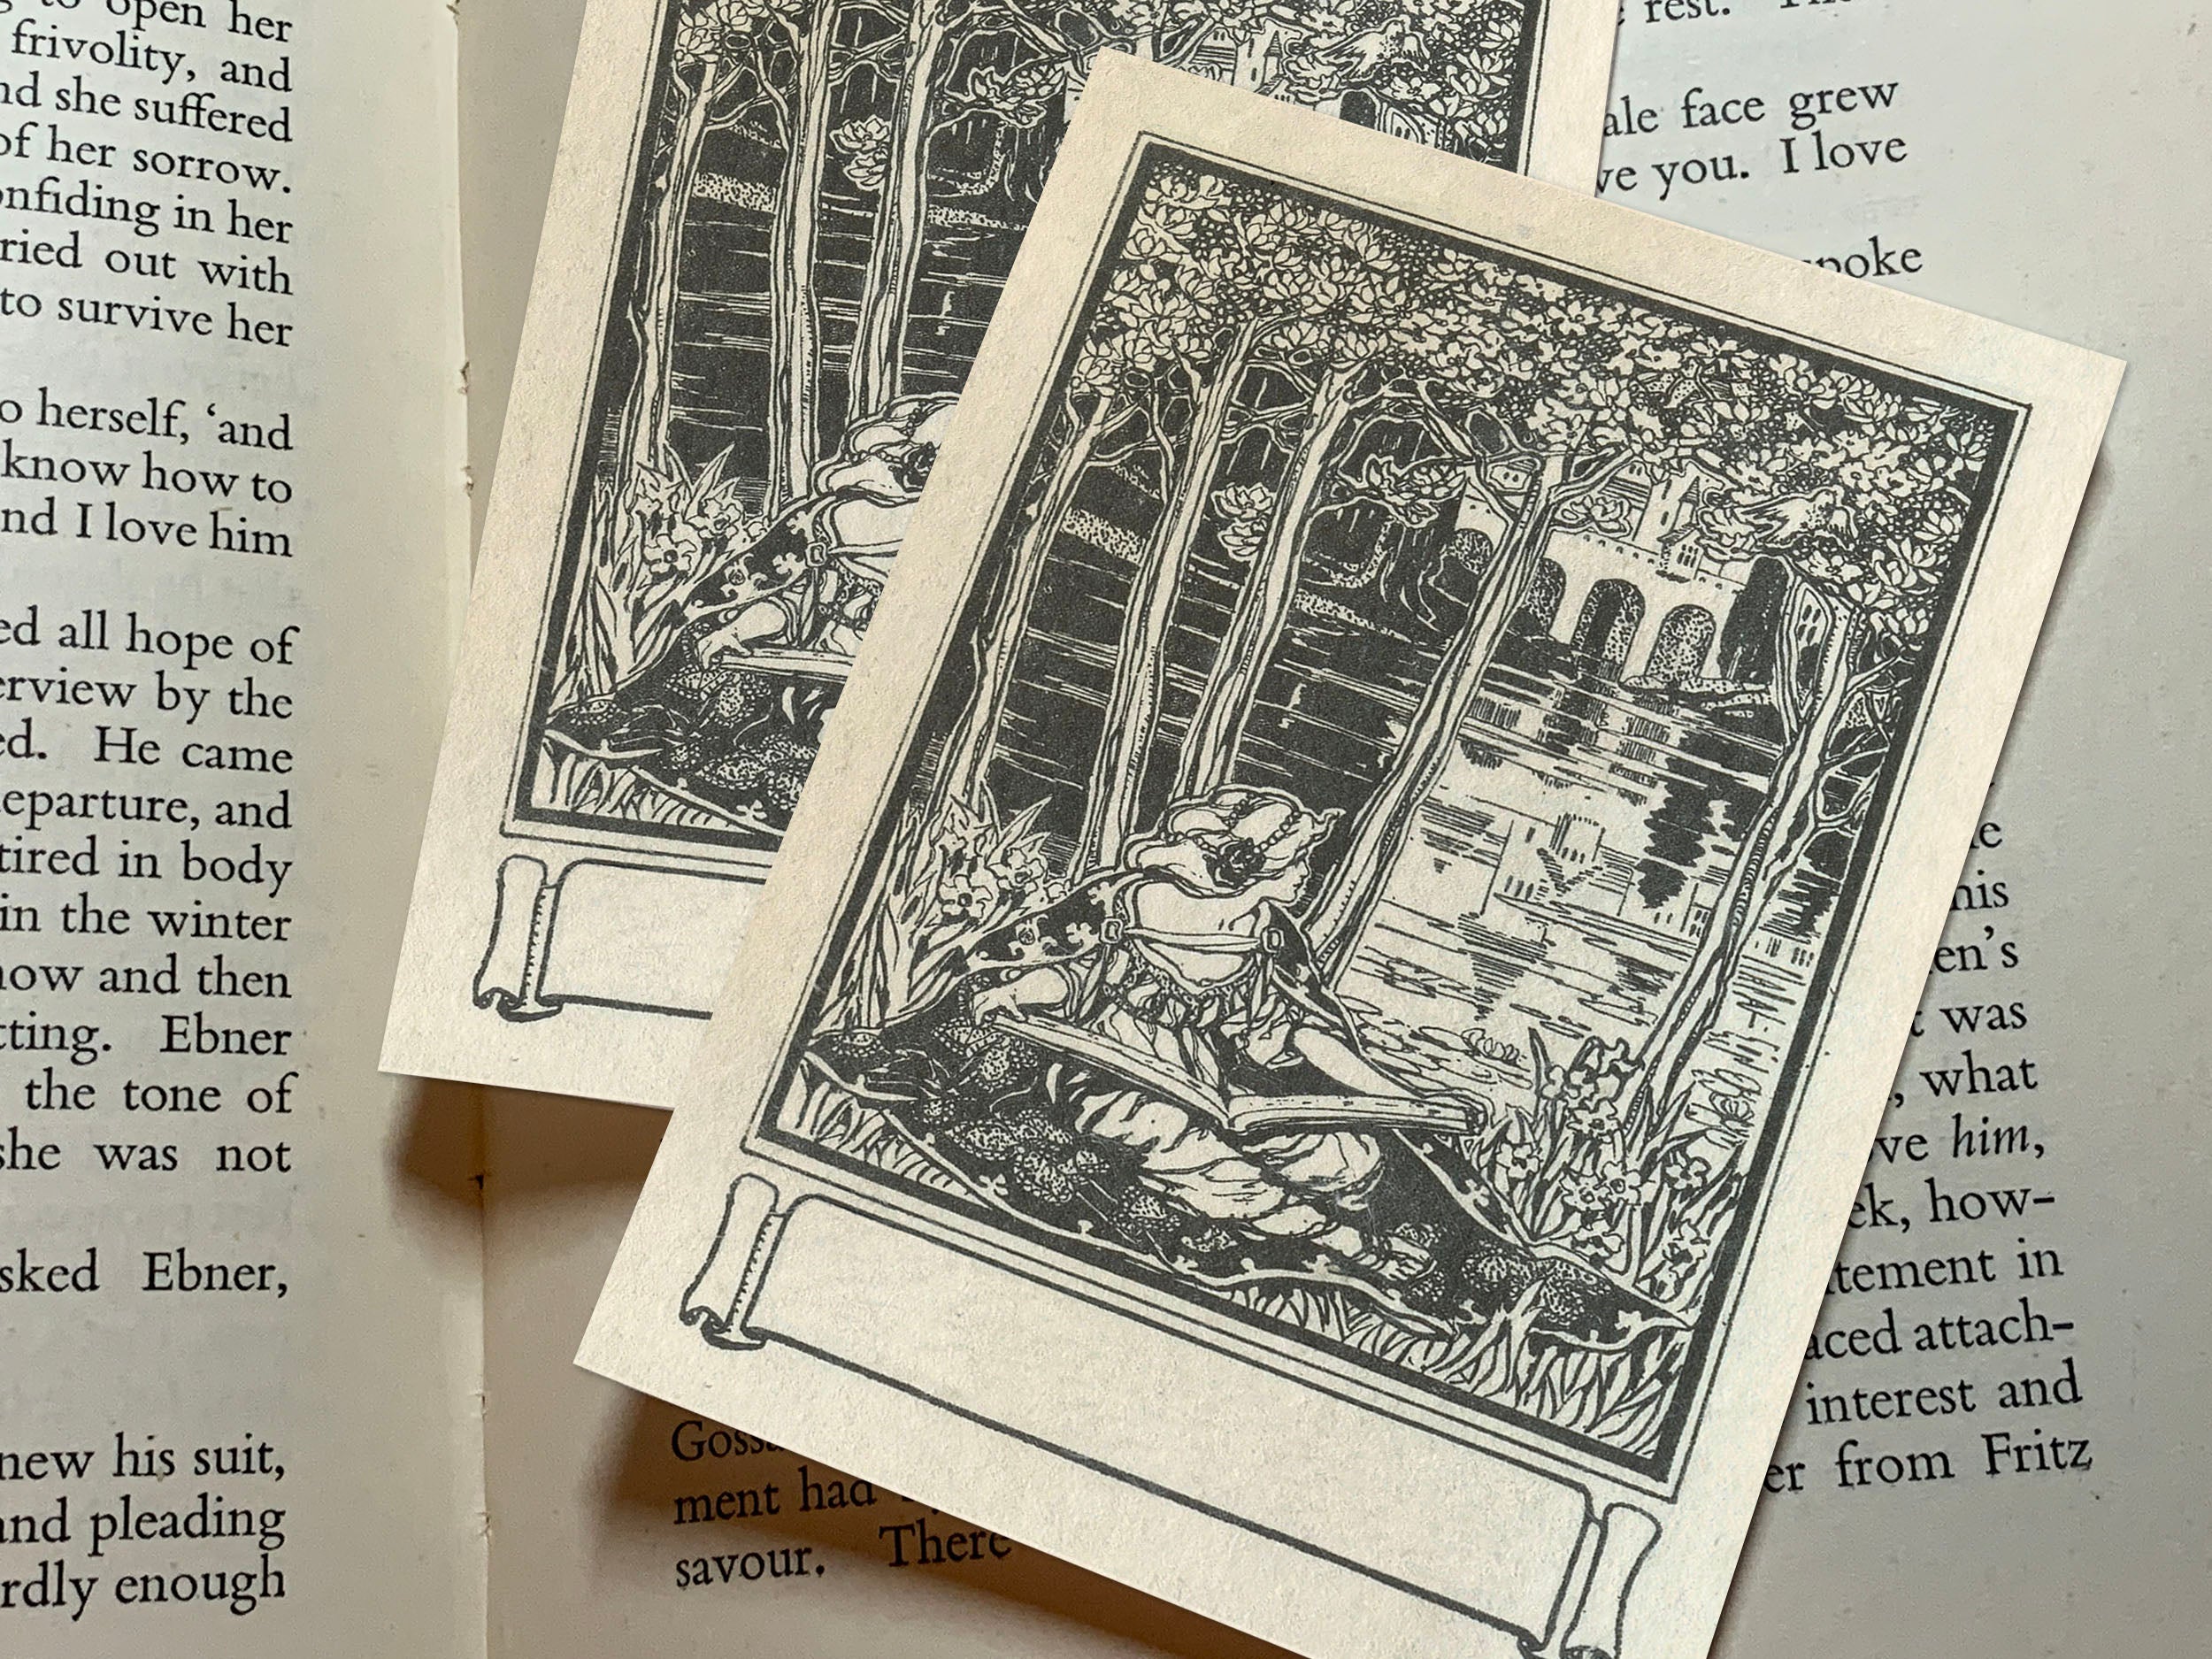 Princess by the Lake, Personalized Ex-Libris Bookplates, Crafted on Traditional Gummed Paper, 3in x 4in, Set of 30